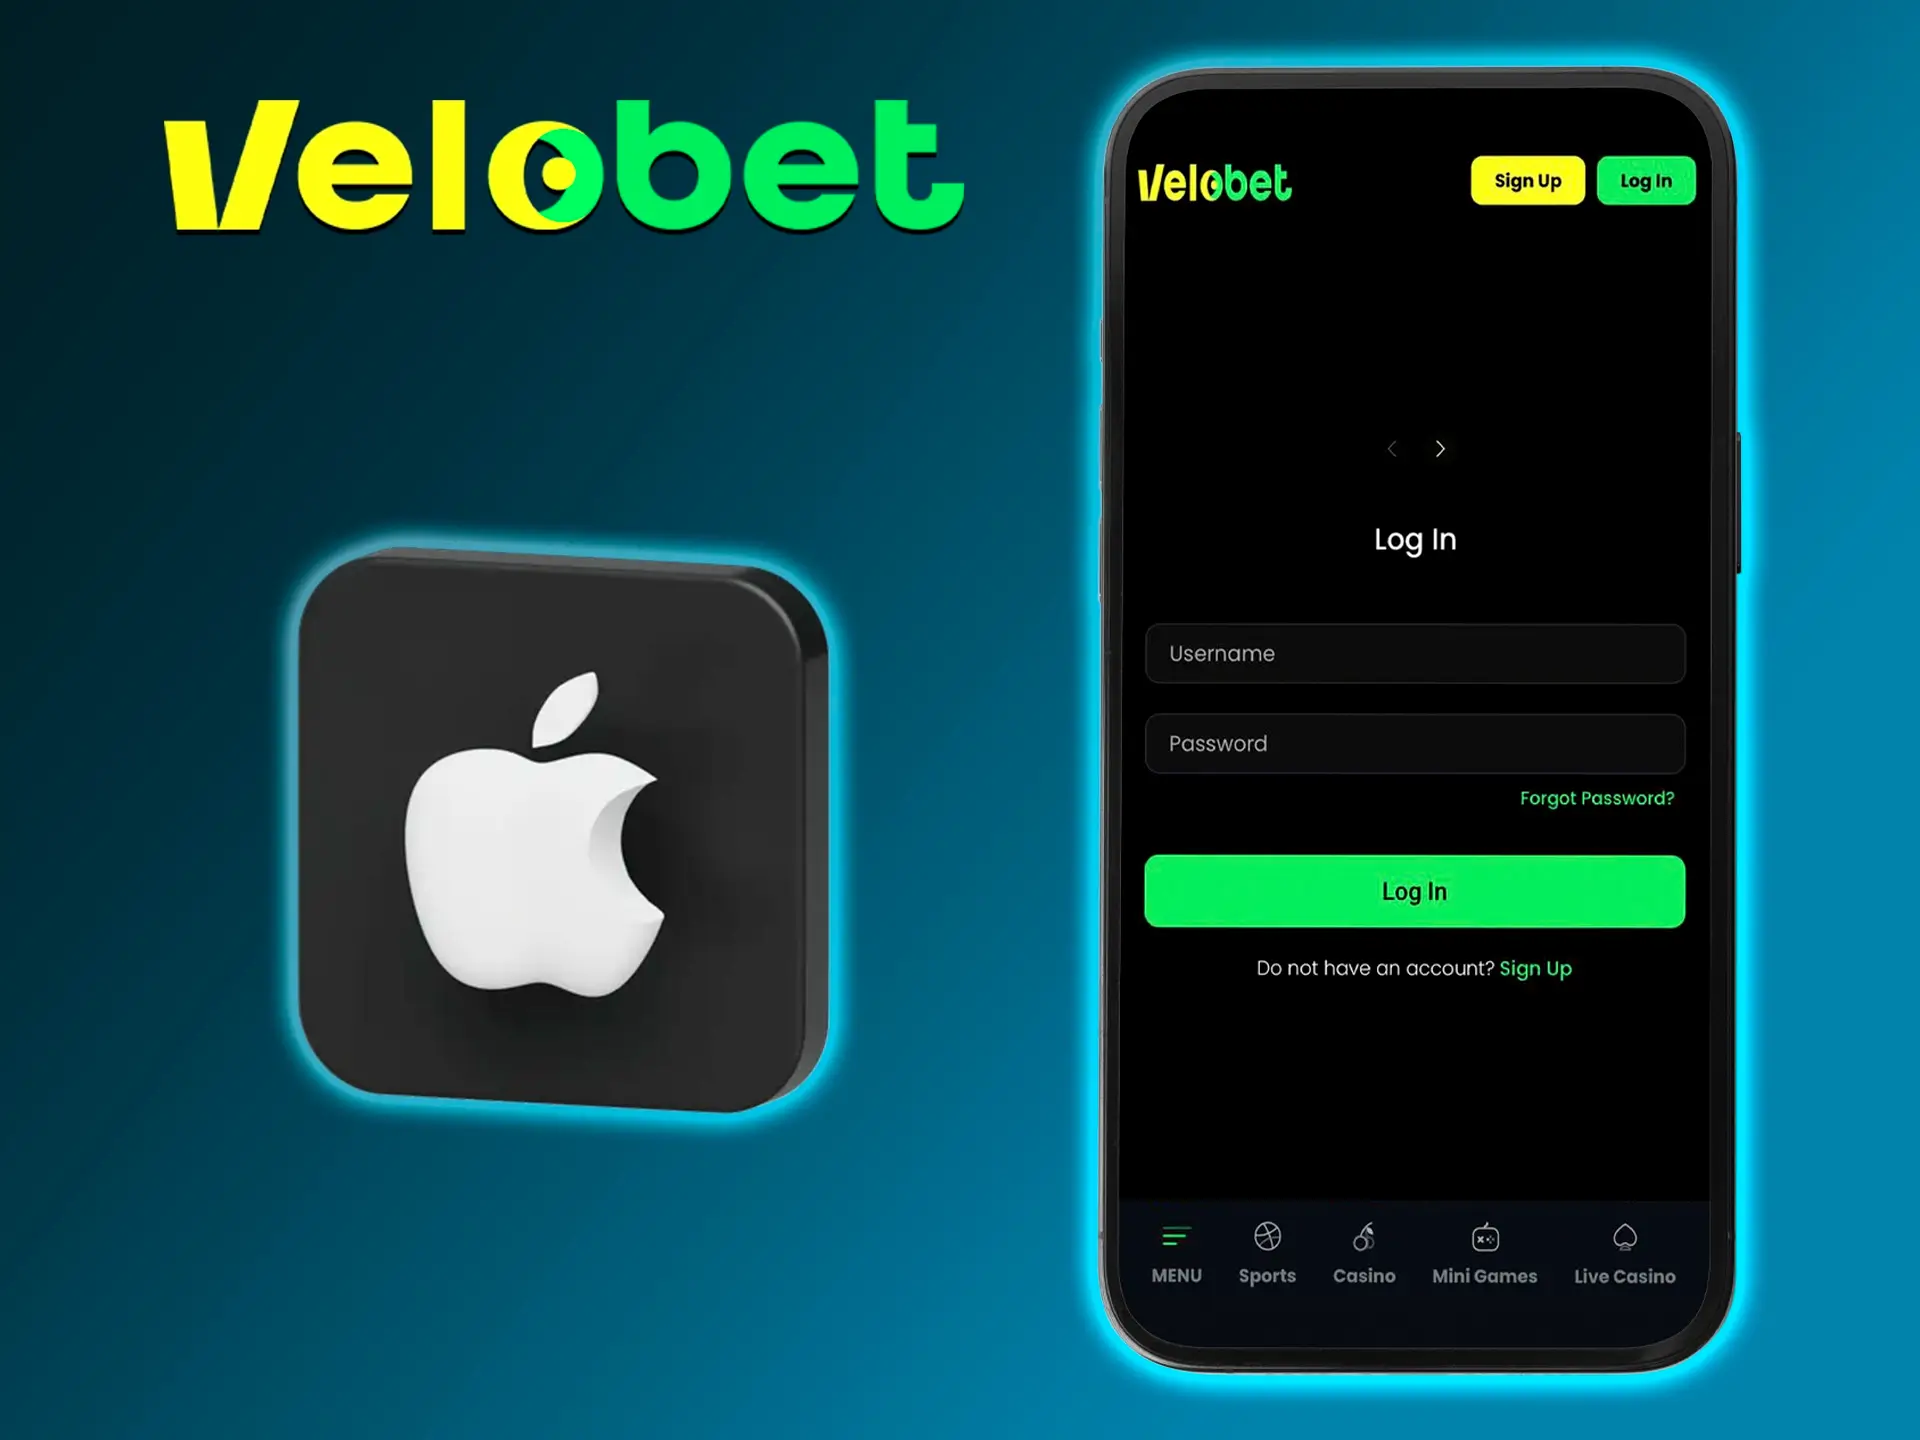 The Velobet app for iOS is a high level of graphics and smooth operation.